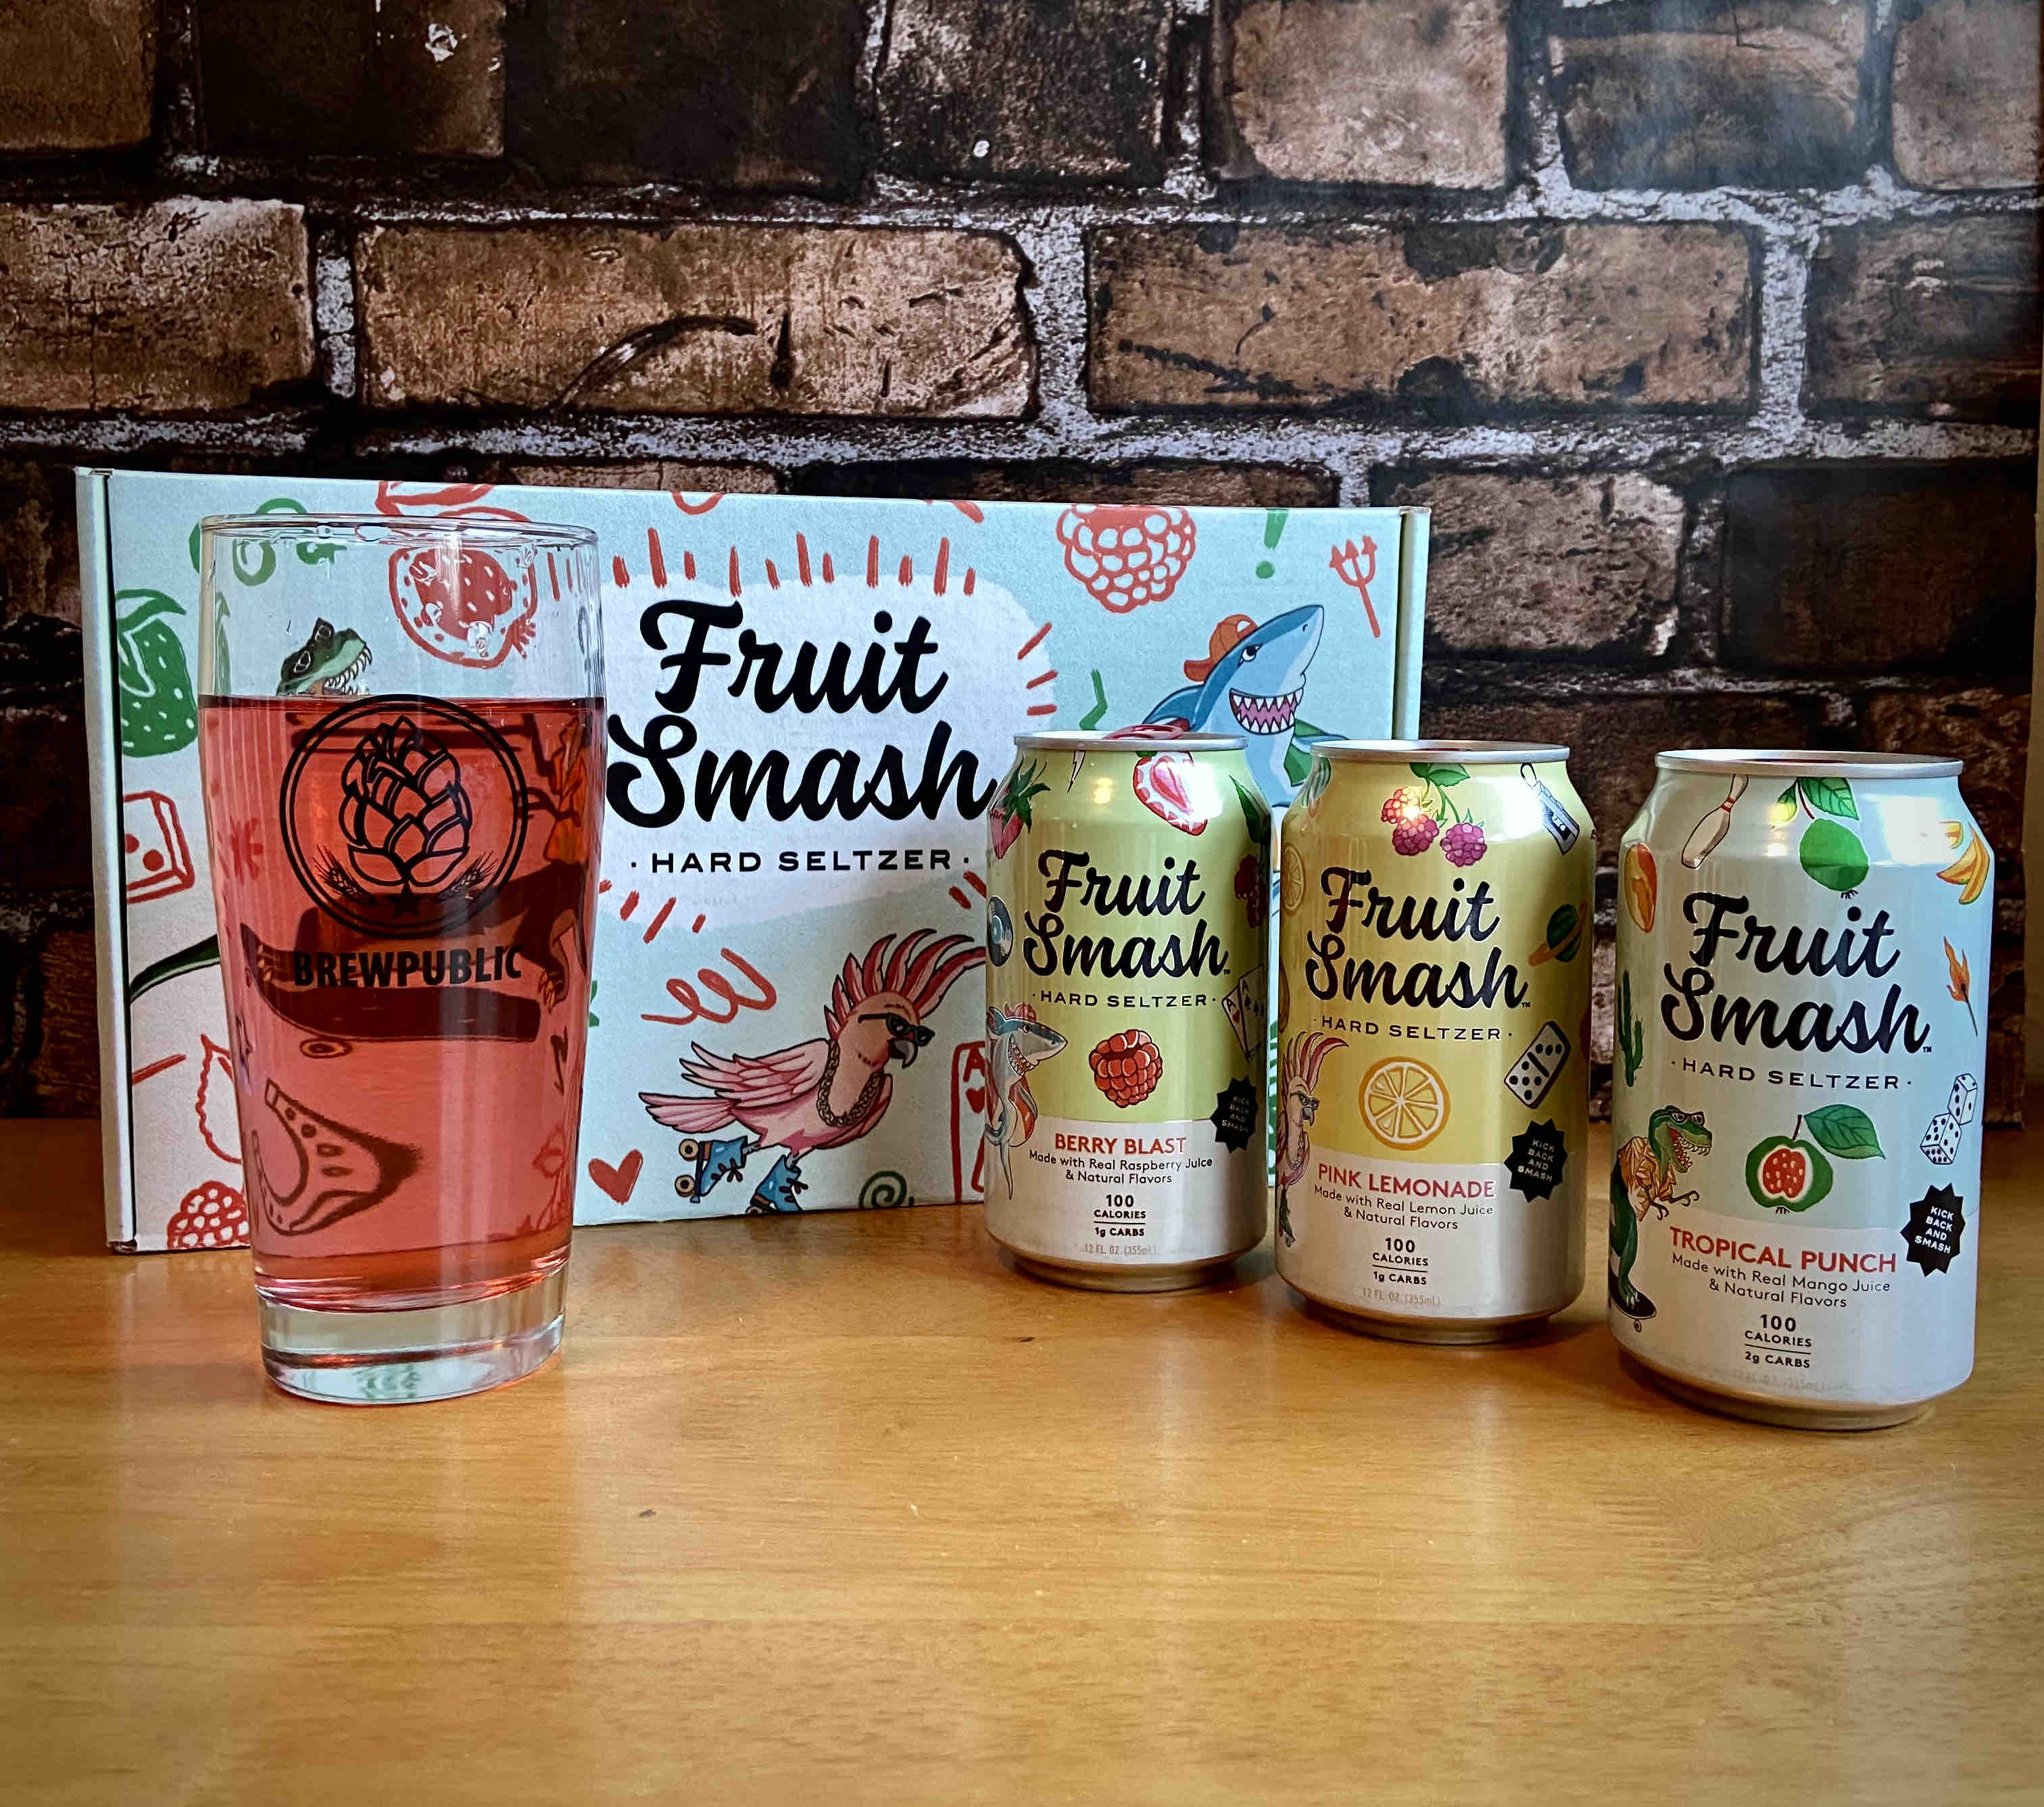 The lineup of Fruit Smash, a new hard seltzer from New Belgium Brewing.